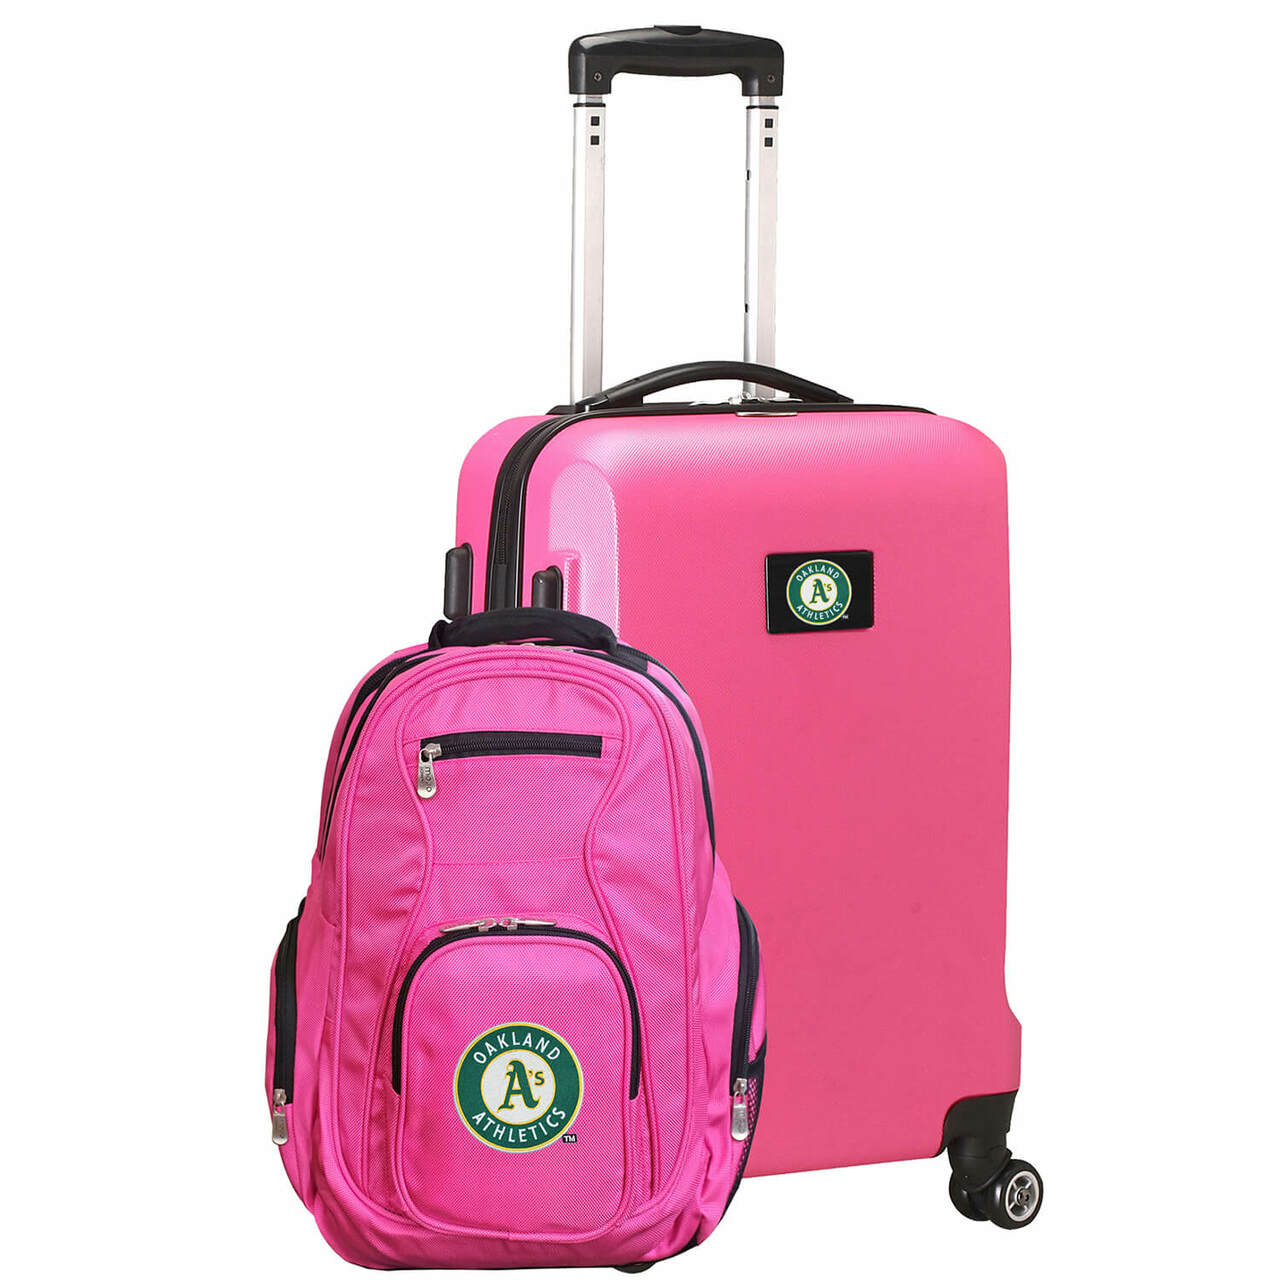 Oakland Athletics Deluxe 2-Piece Backpack and Carry on Set in Pink